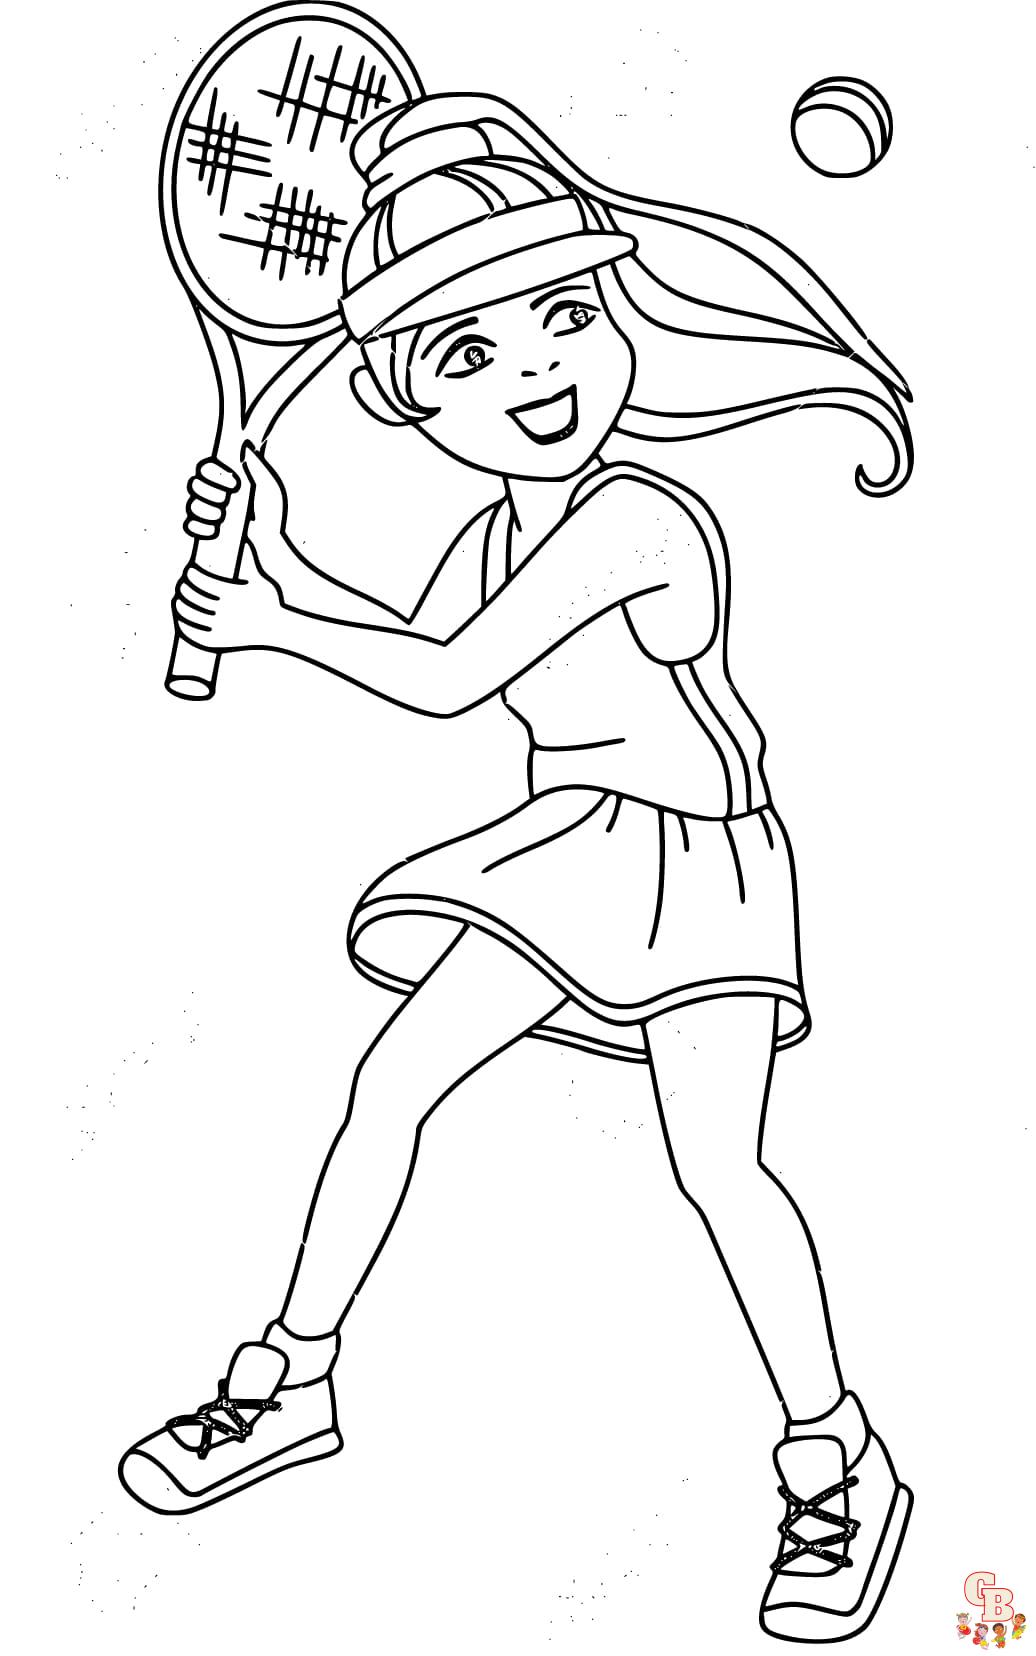 tennis coloring pages to print